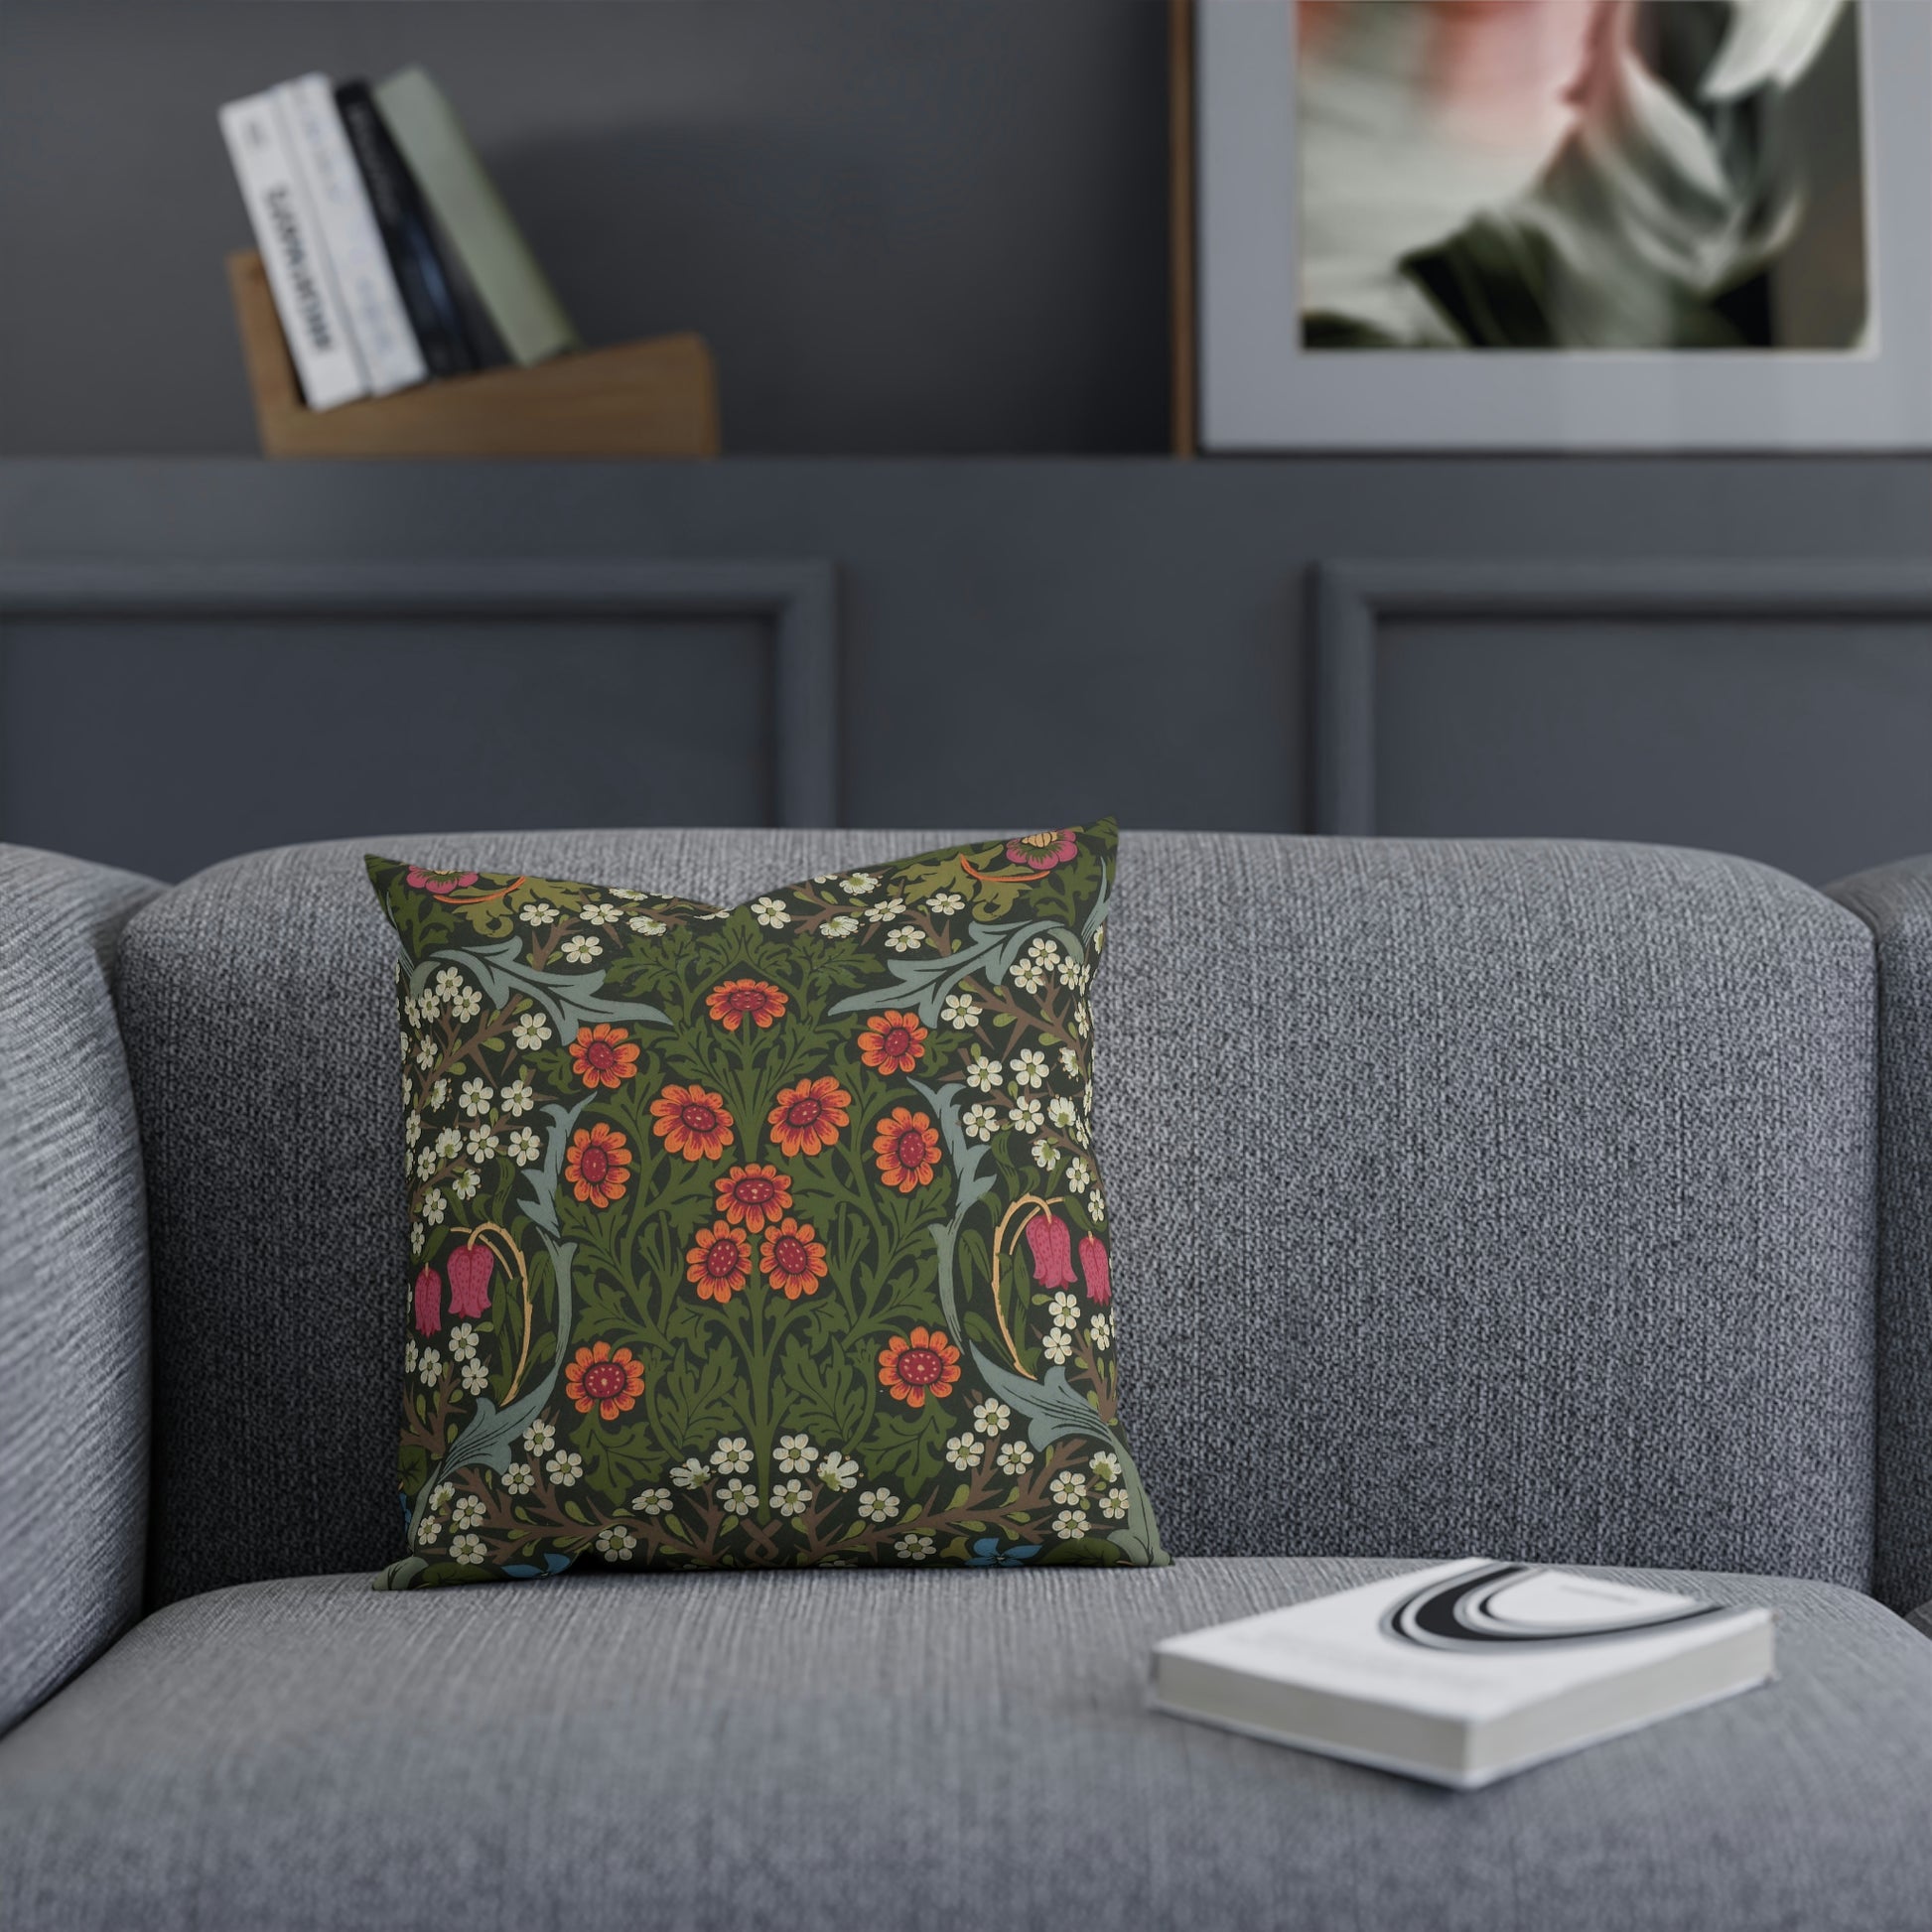 william-morris-cushion-and-cushion-cover-blackthorn-collection-9